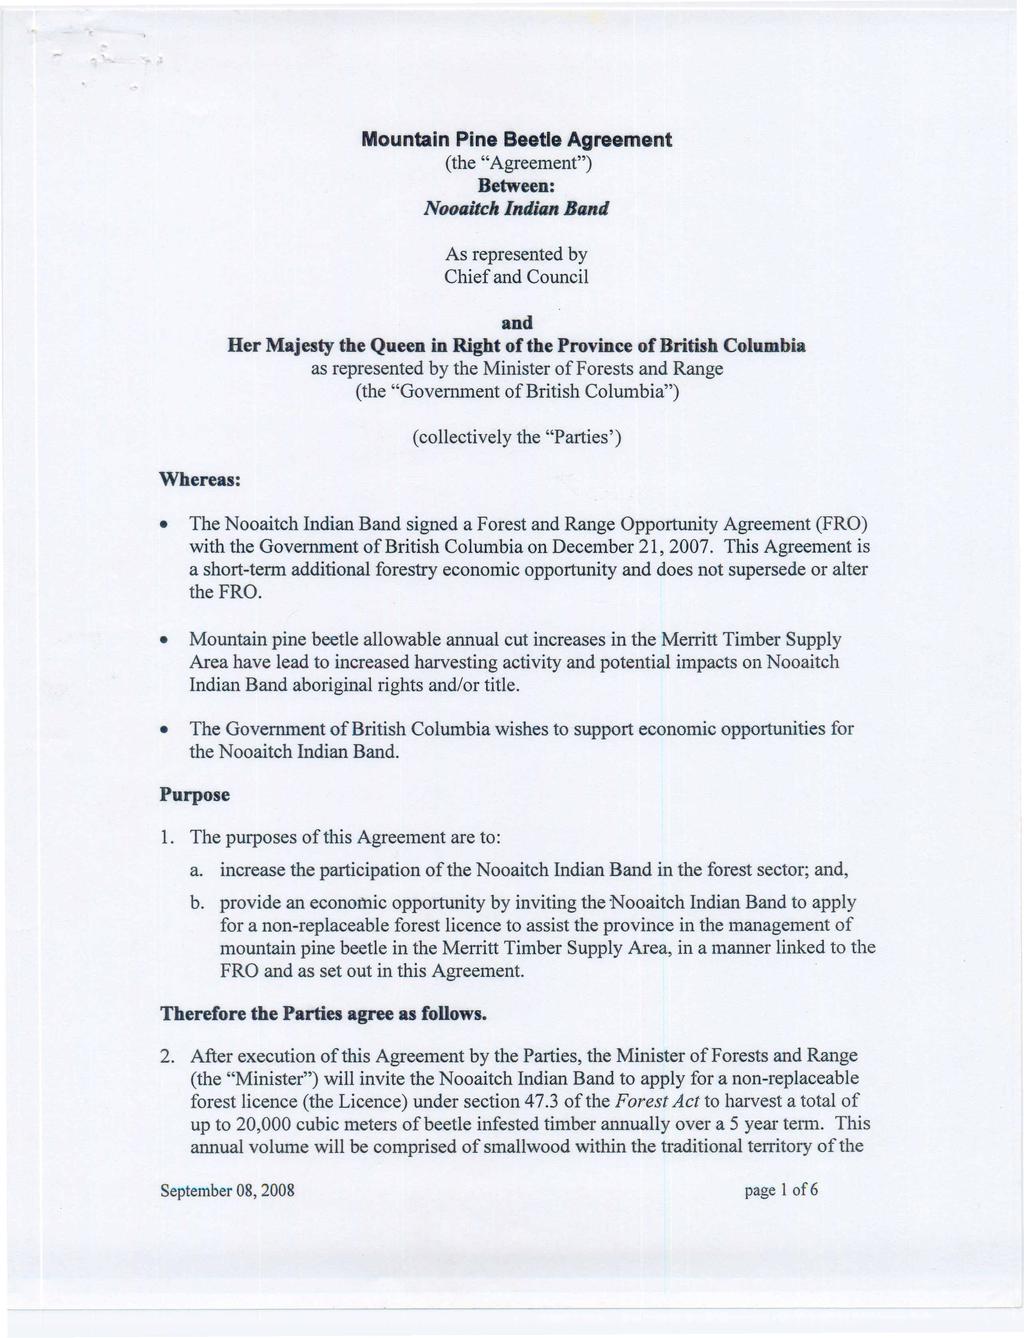 Mountain Pine Beetle Agreement (the "Agreement") Between: Nooaitch Indian Band As represented by Chief and Council and Her Majesty the Queen in Right of the Province of British Columbia as